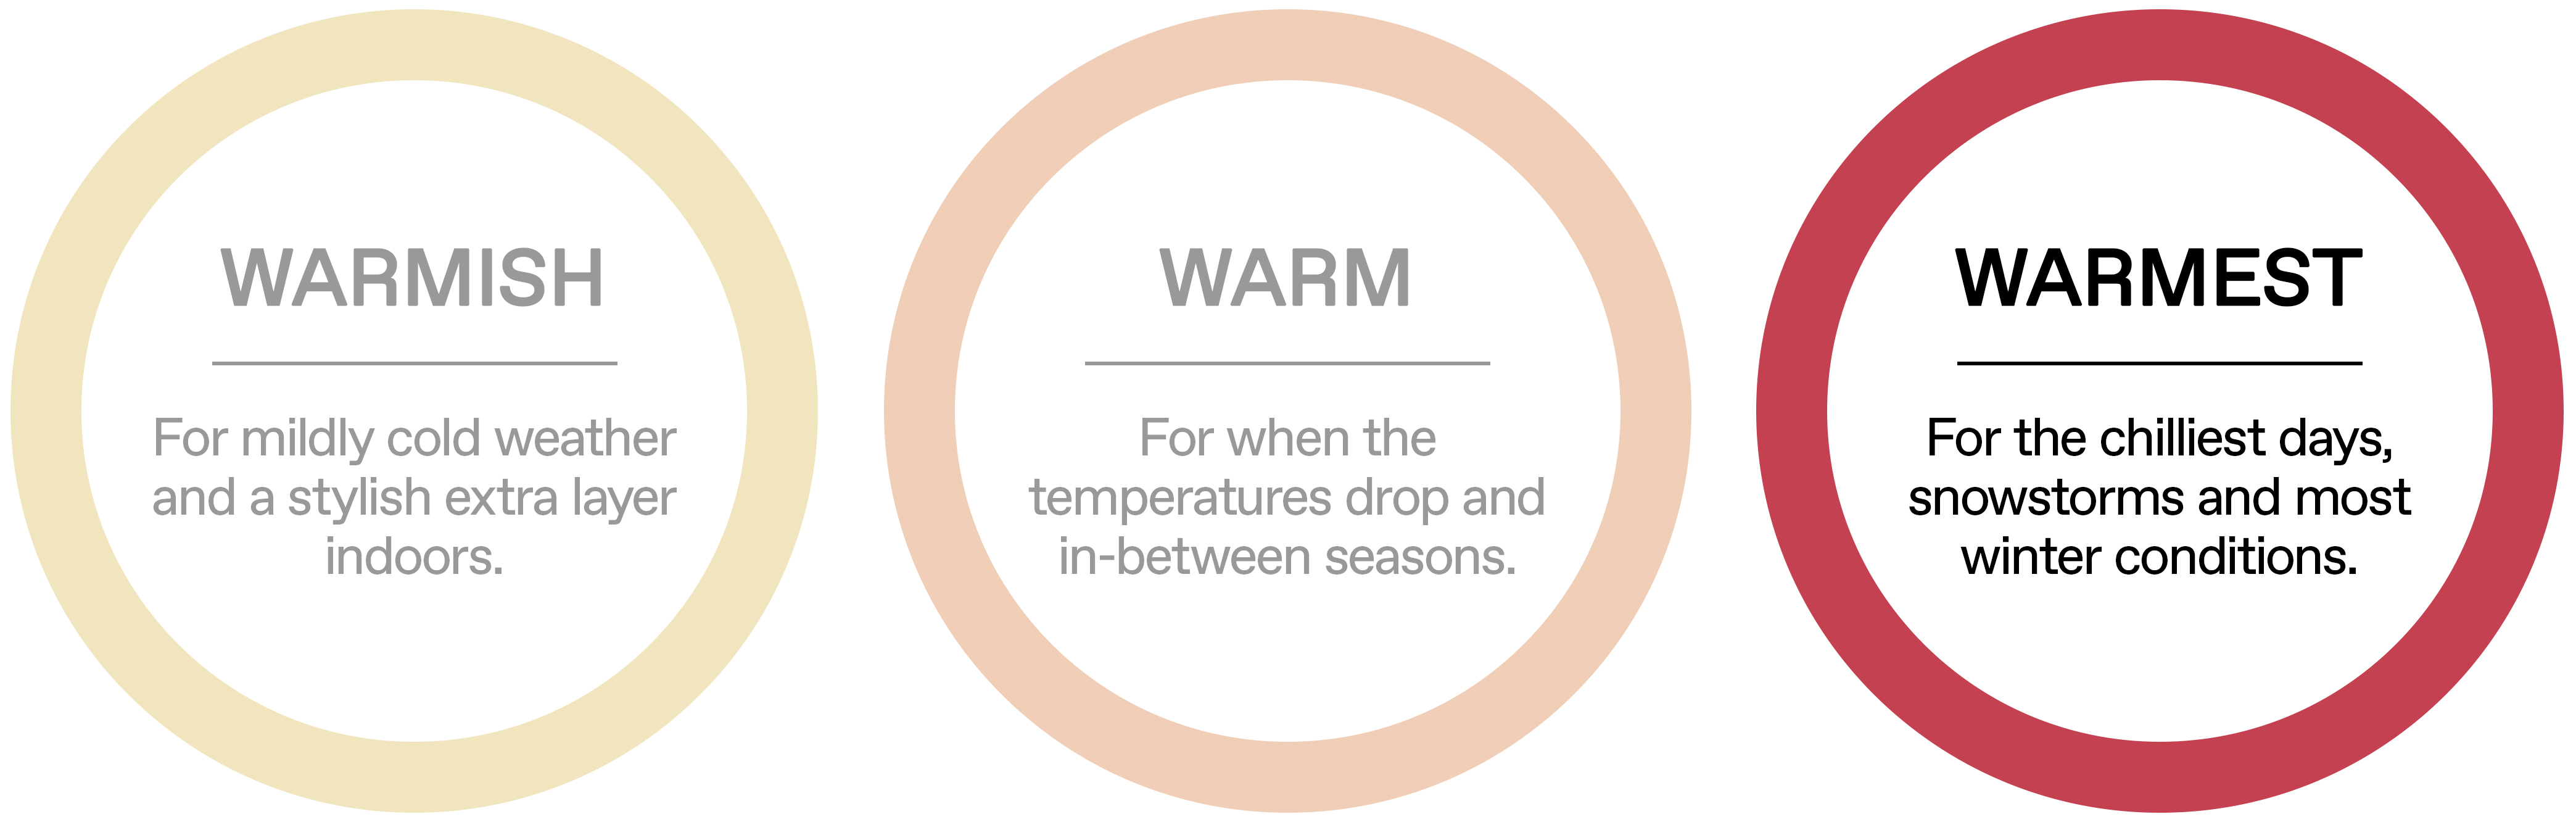 Warmest: For the chilliest days, snowstorms and most winter conditions